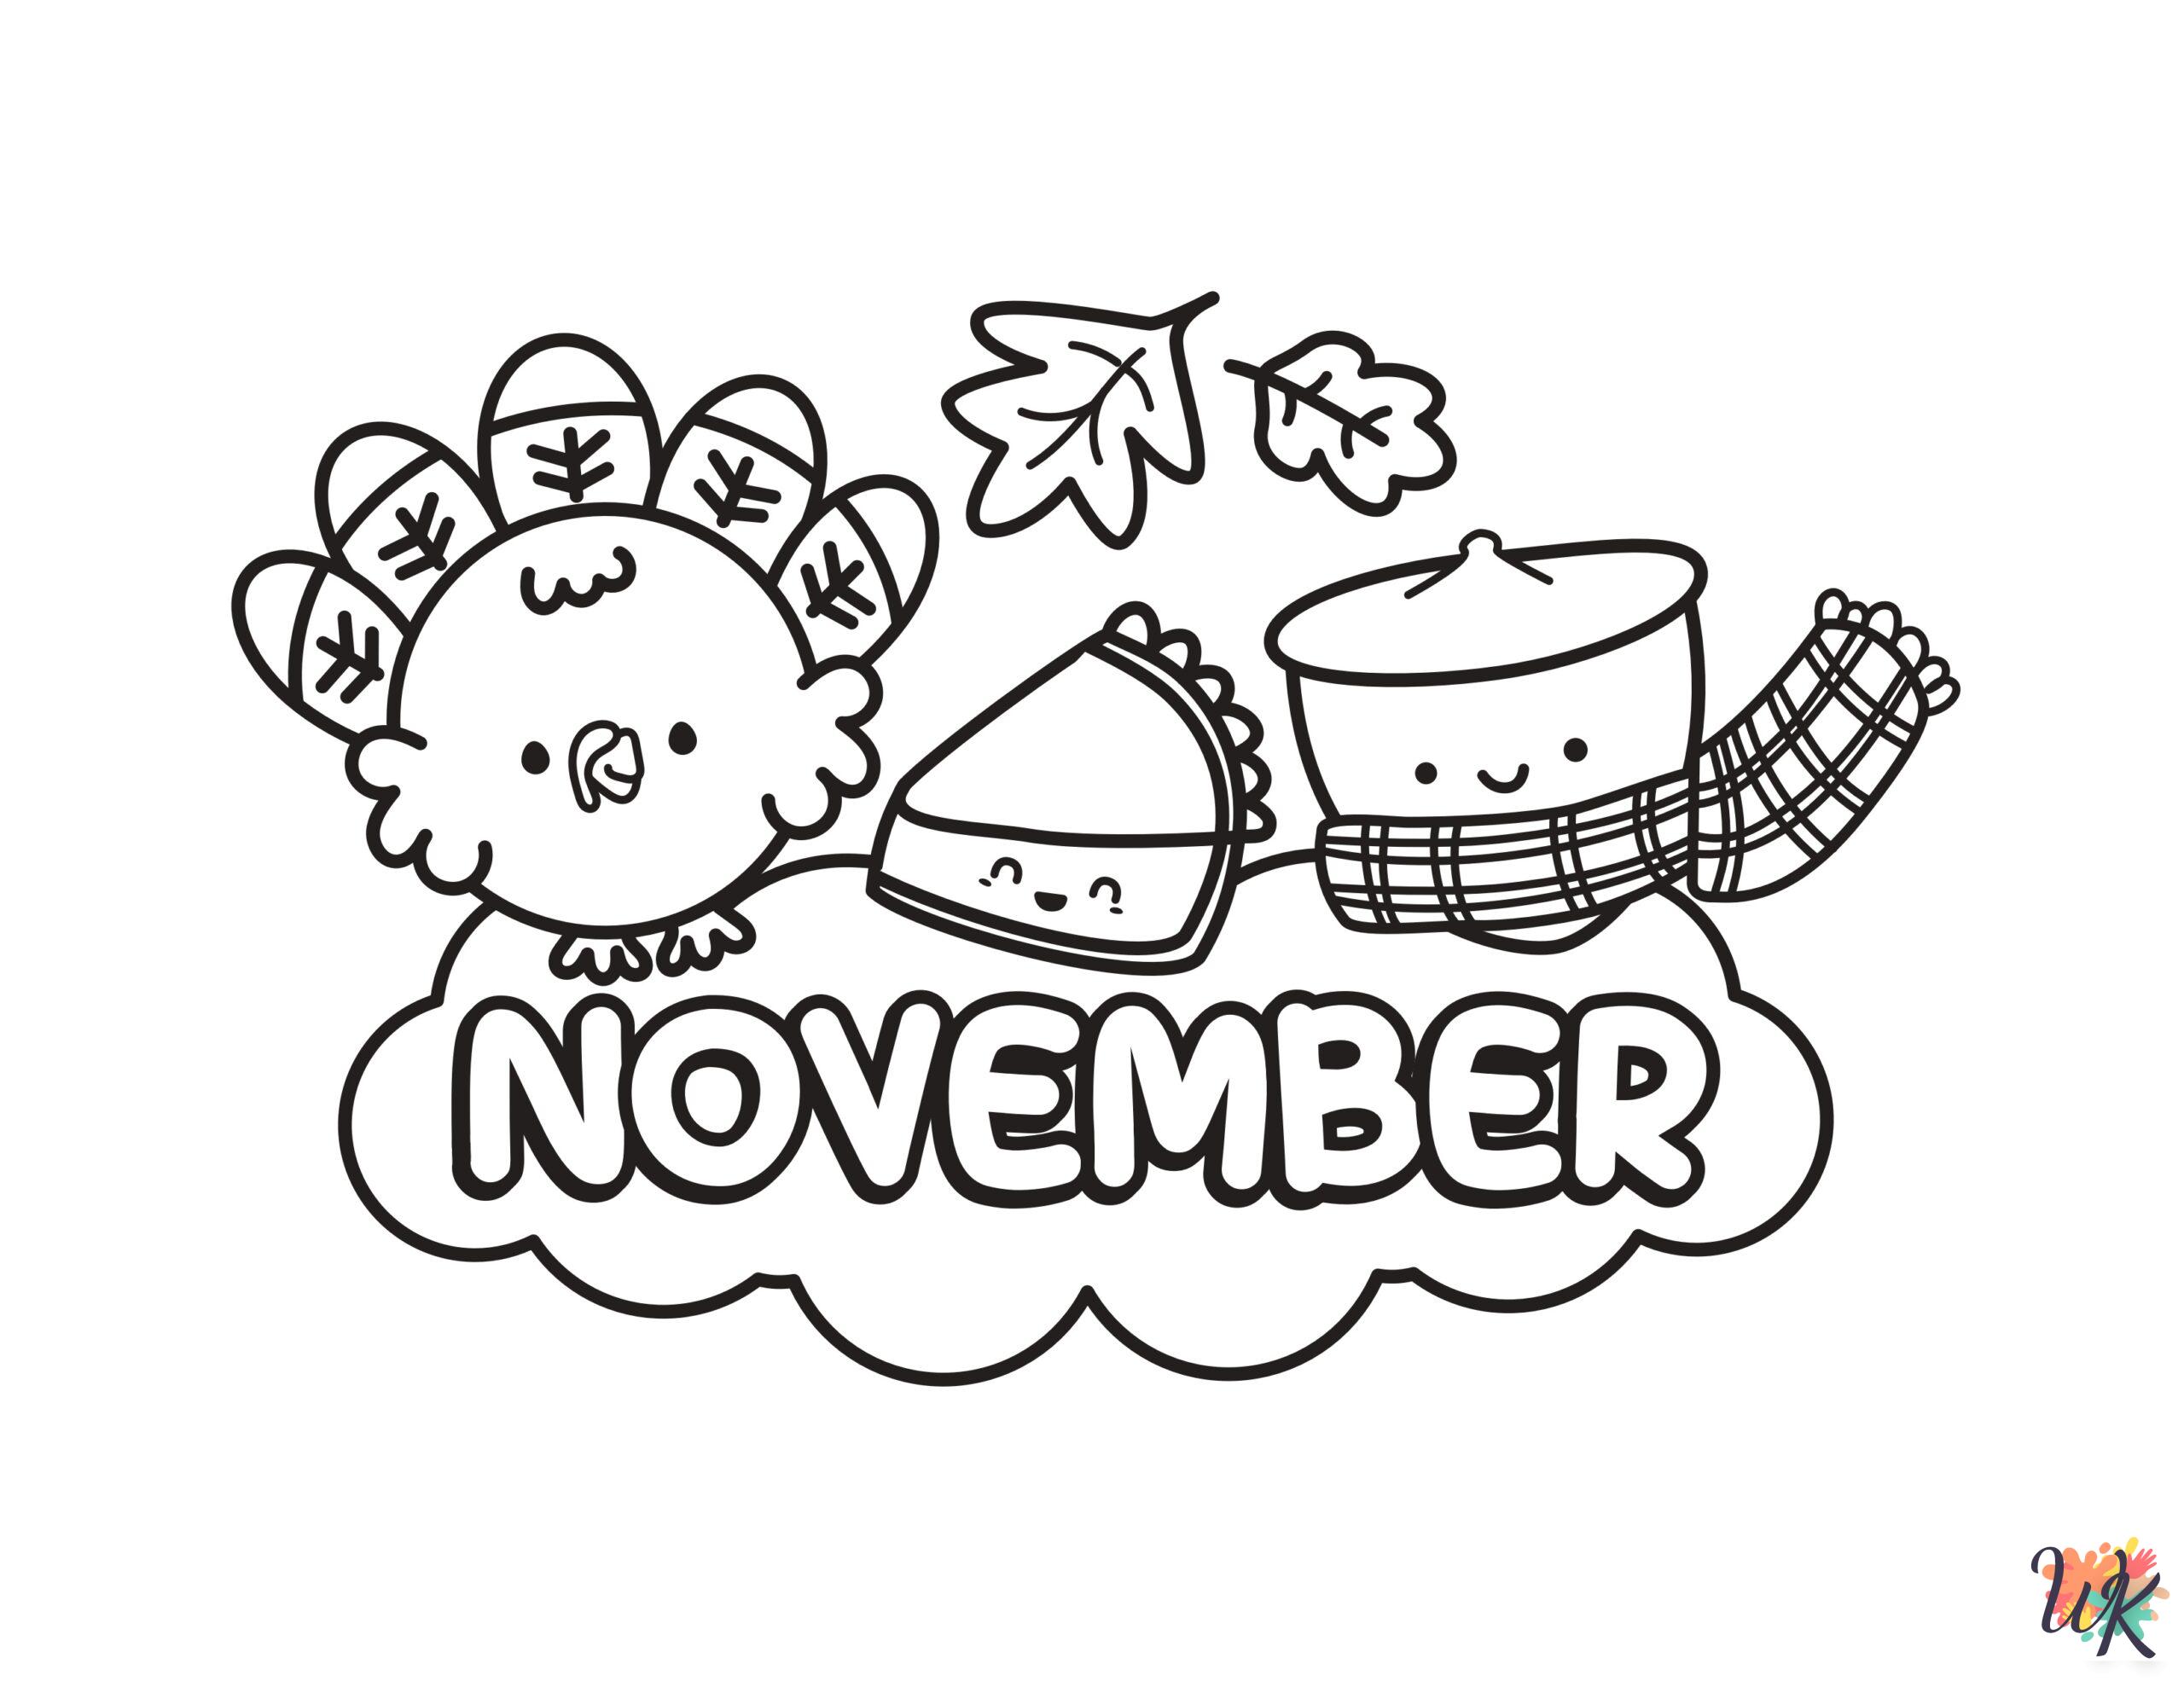 merry November coloring pages